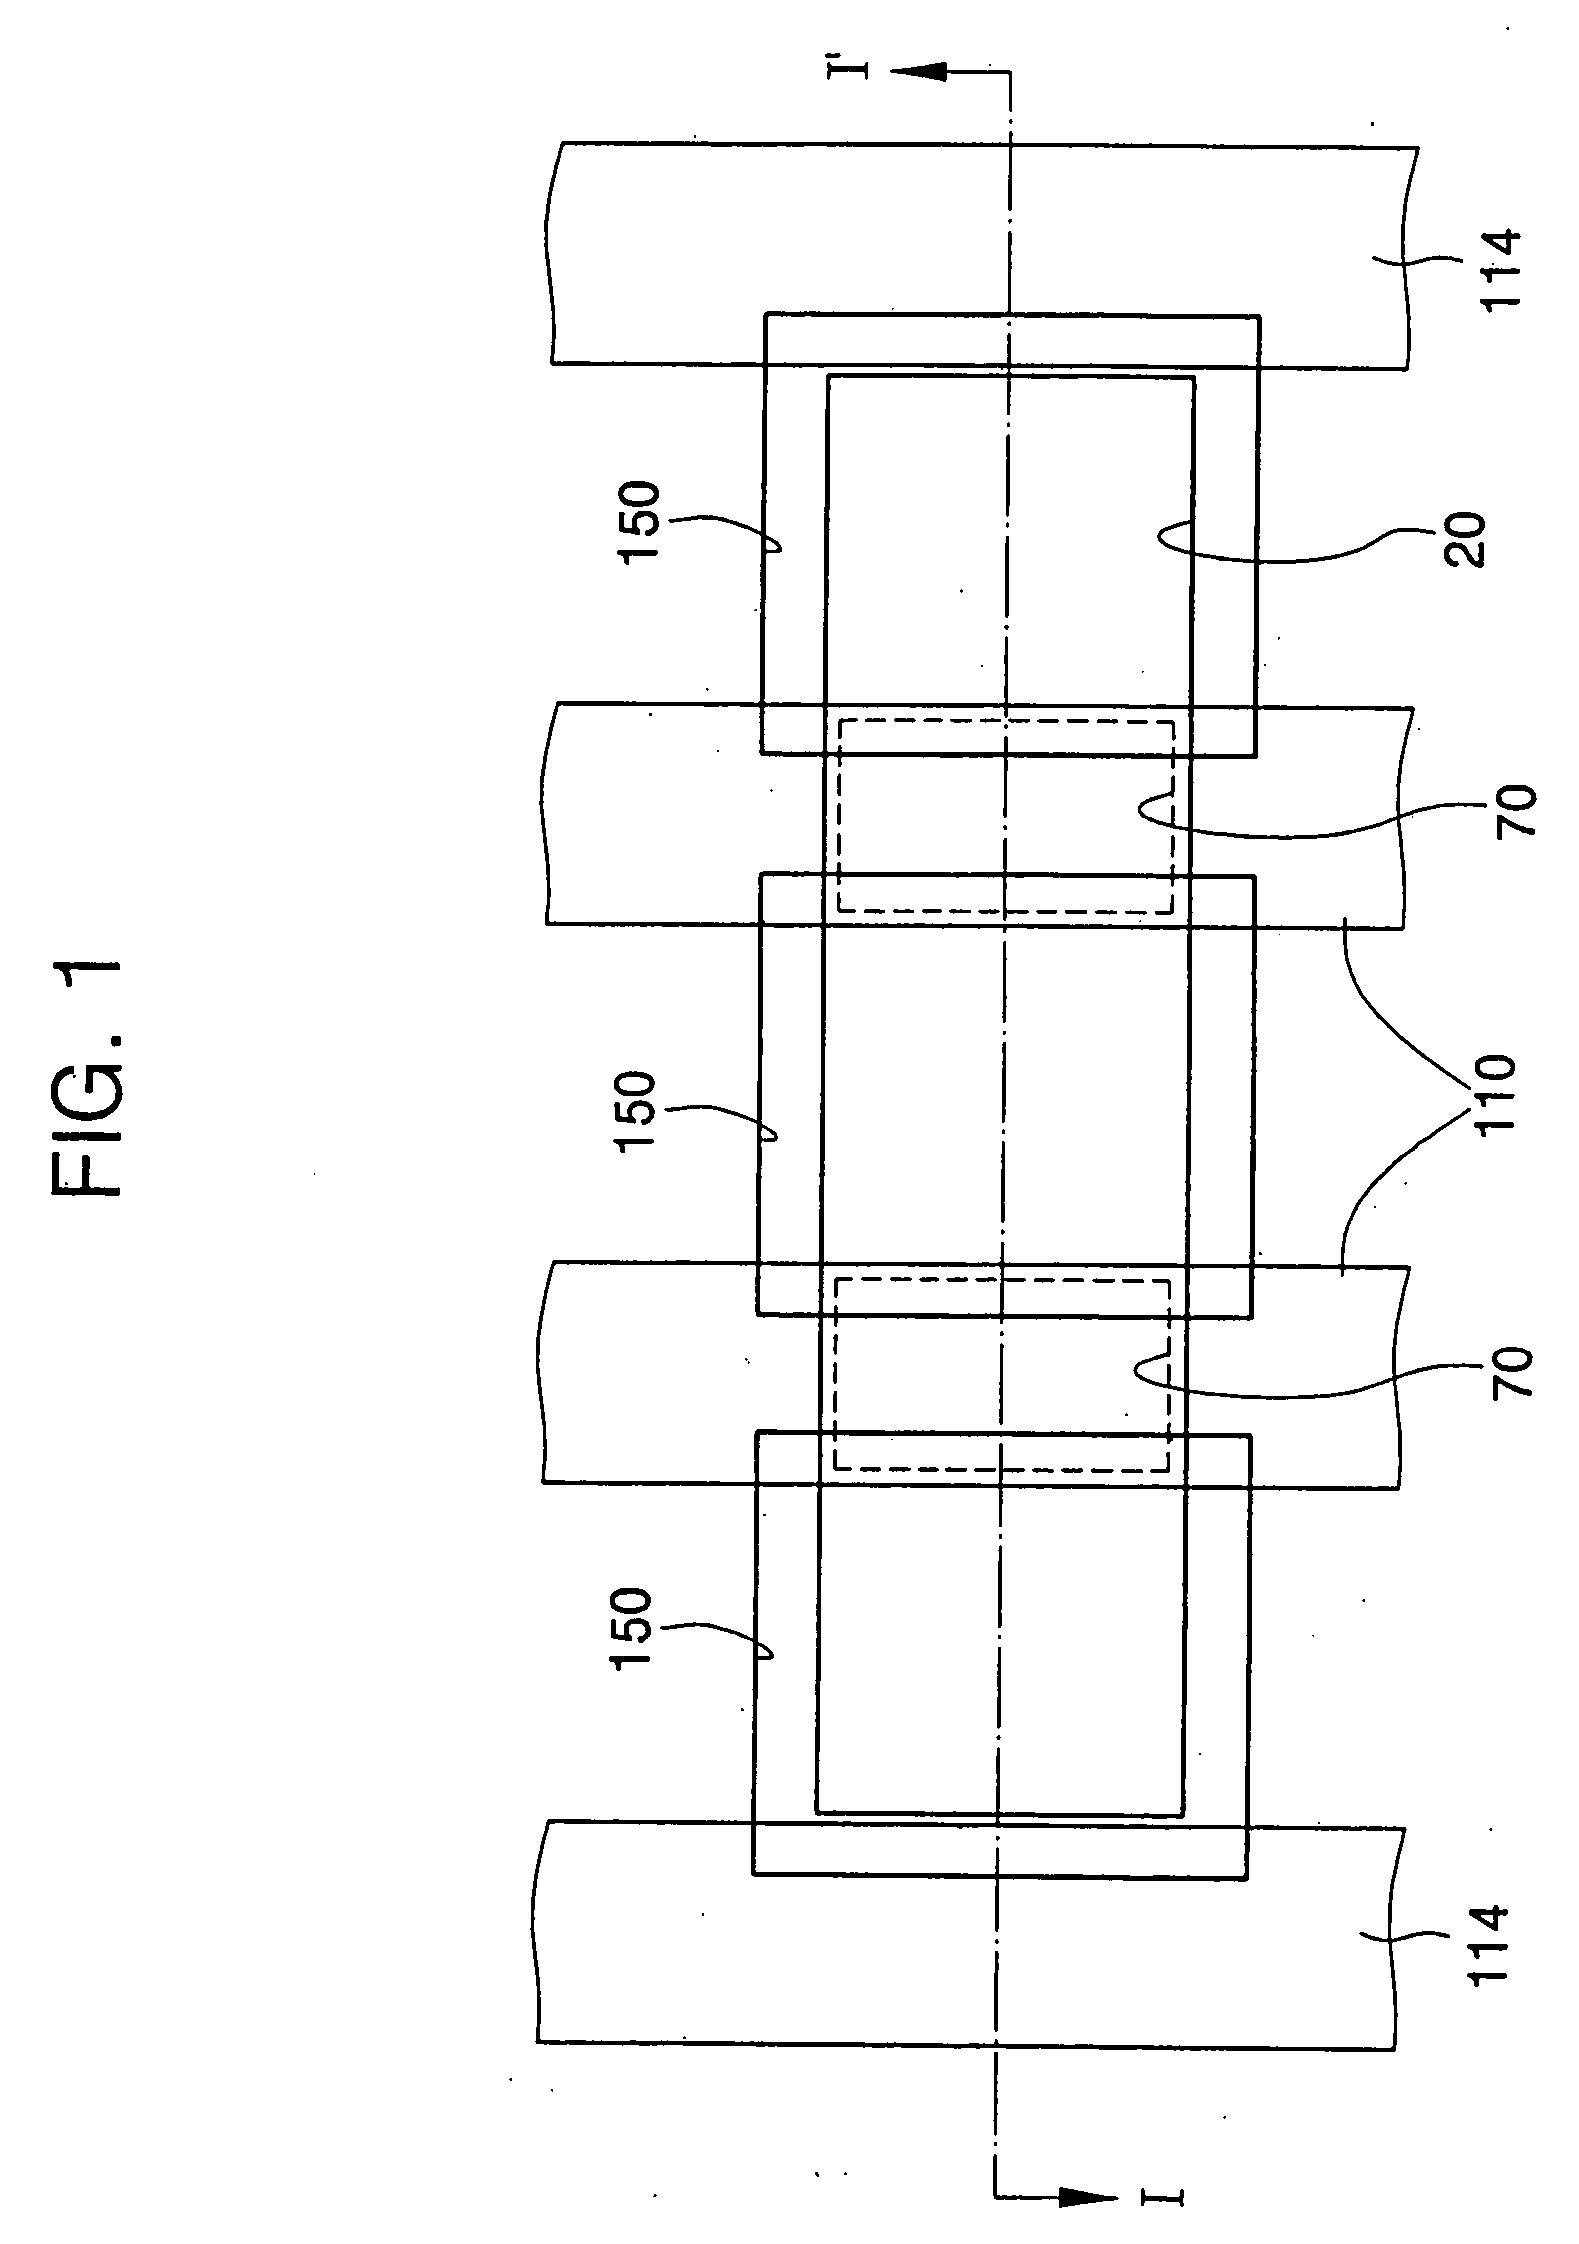 Recessed-type field effect transistor with reduced body effect